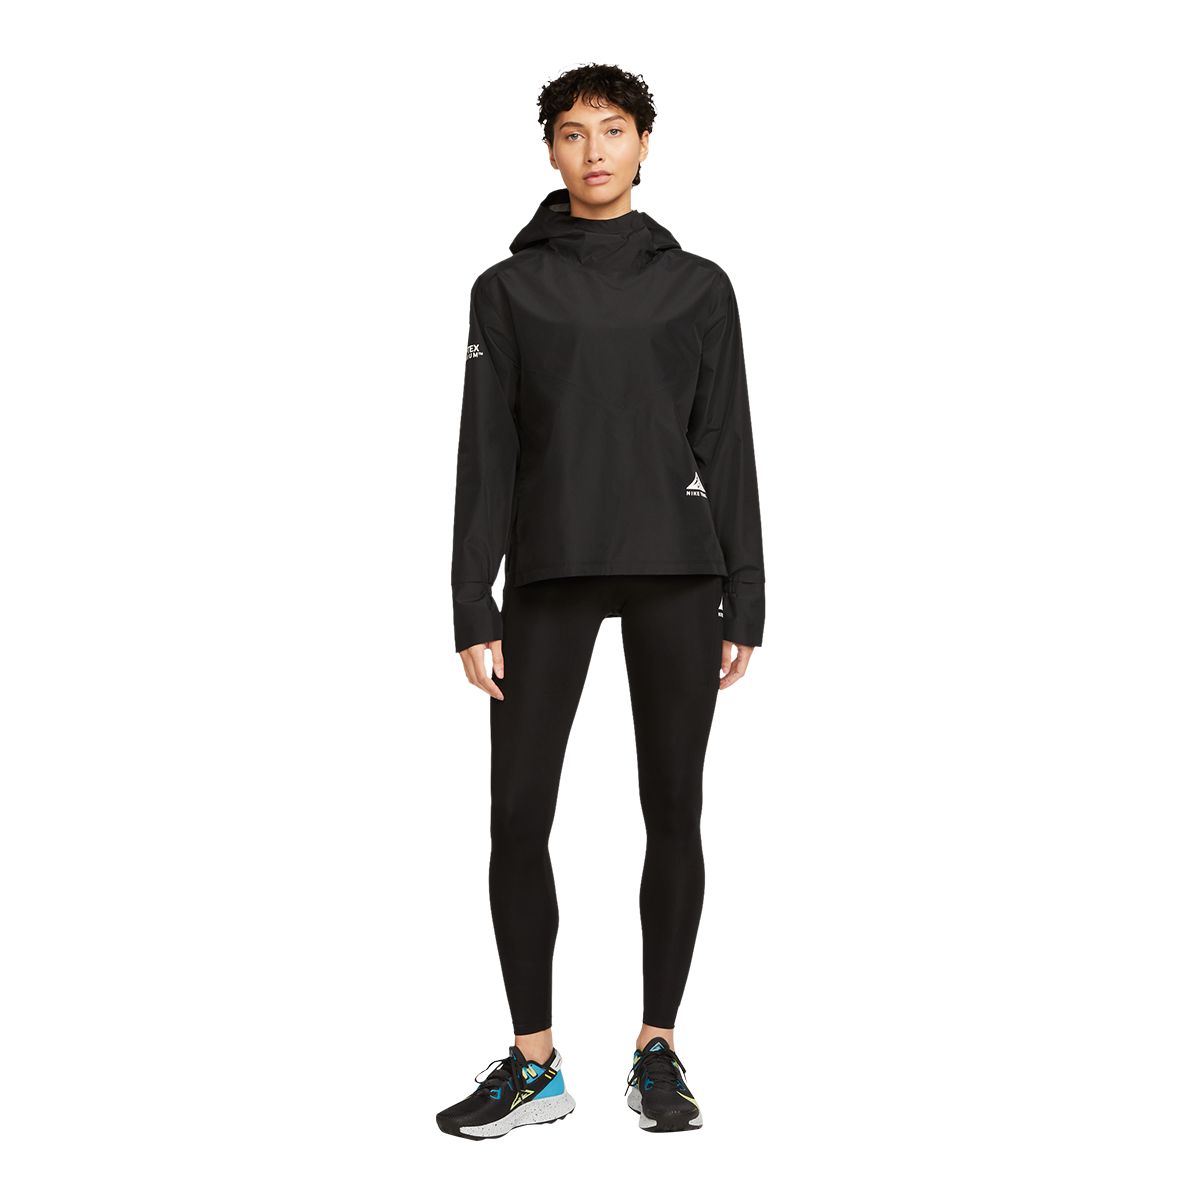 Nike Women's Epic Luxe Trail Mid-Rise Tights